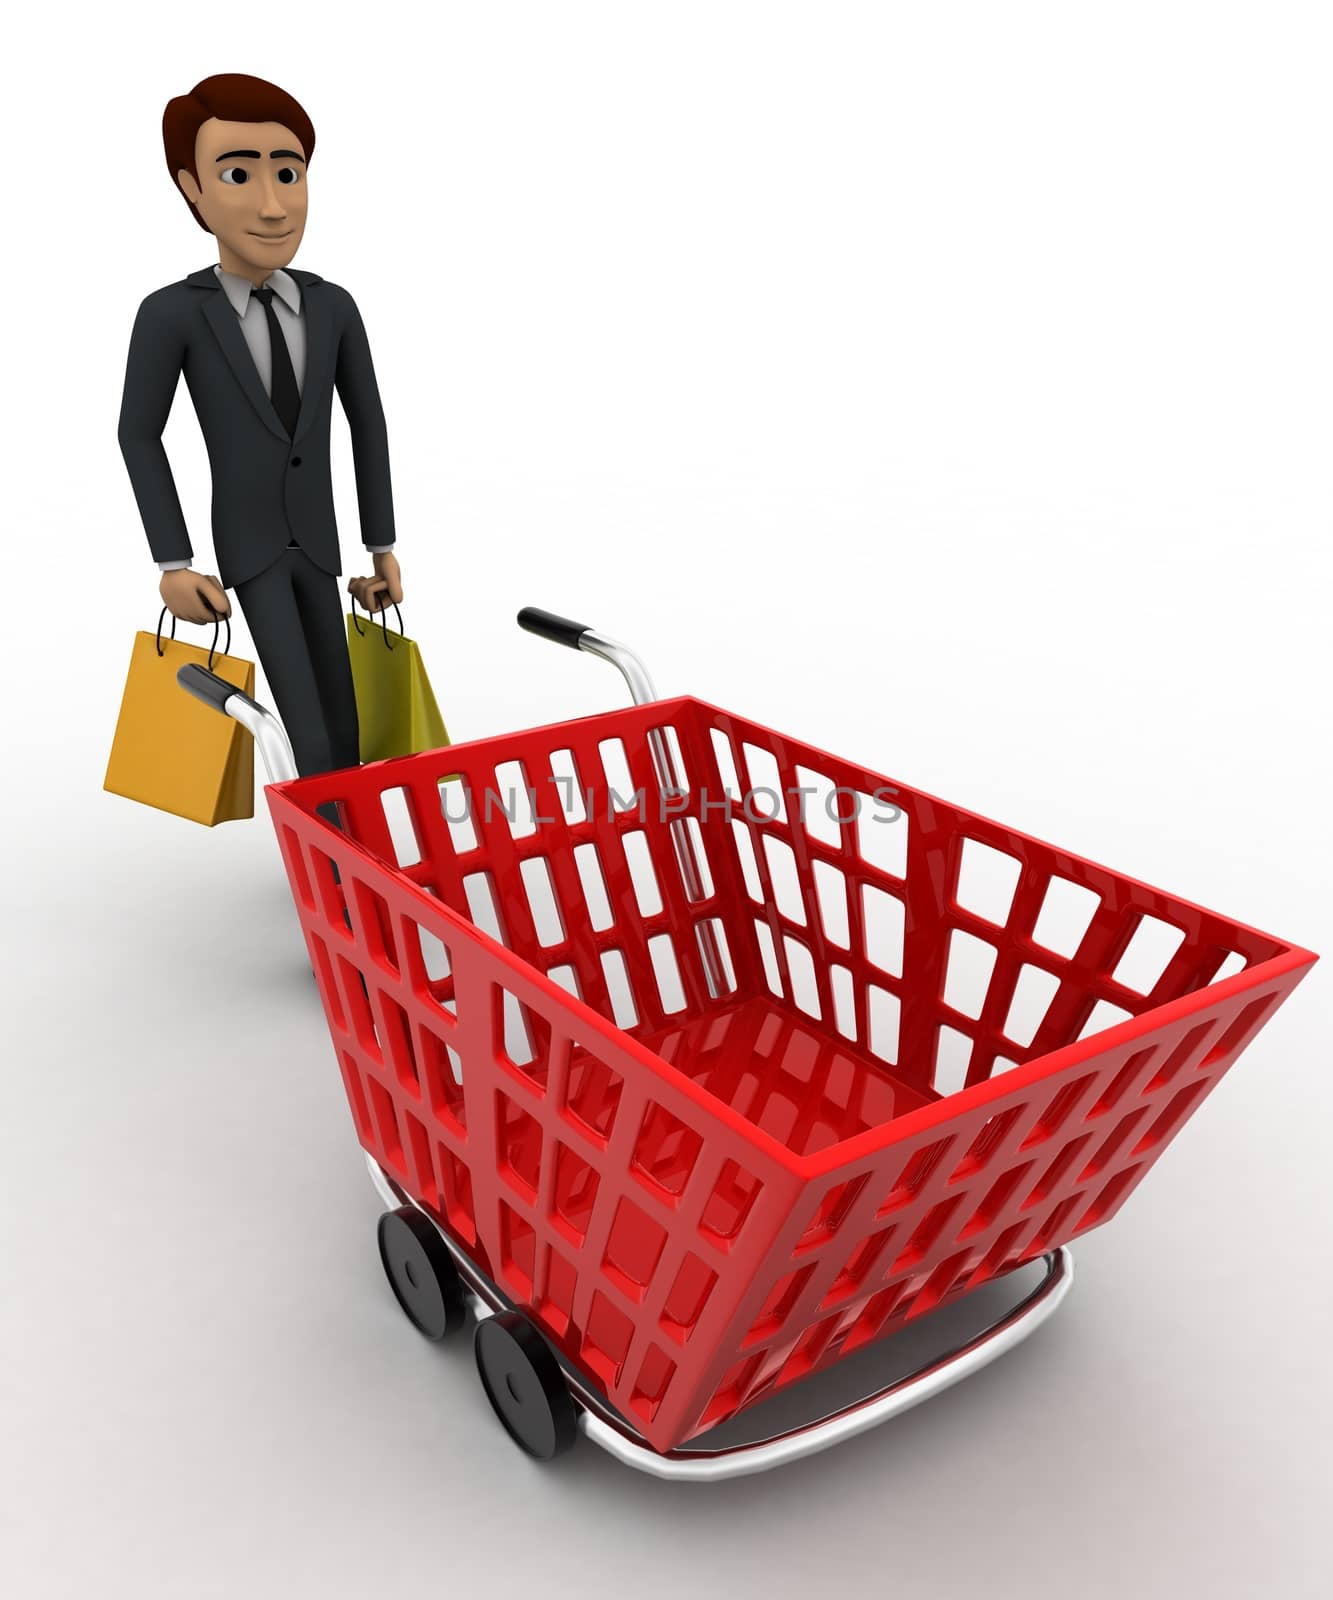 3d man with shopping cart concept by touchmenithin@gmail.com